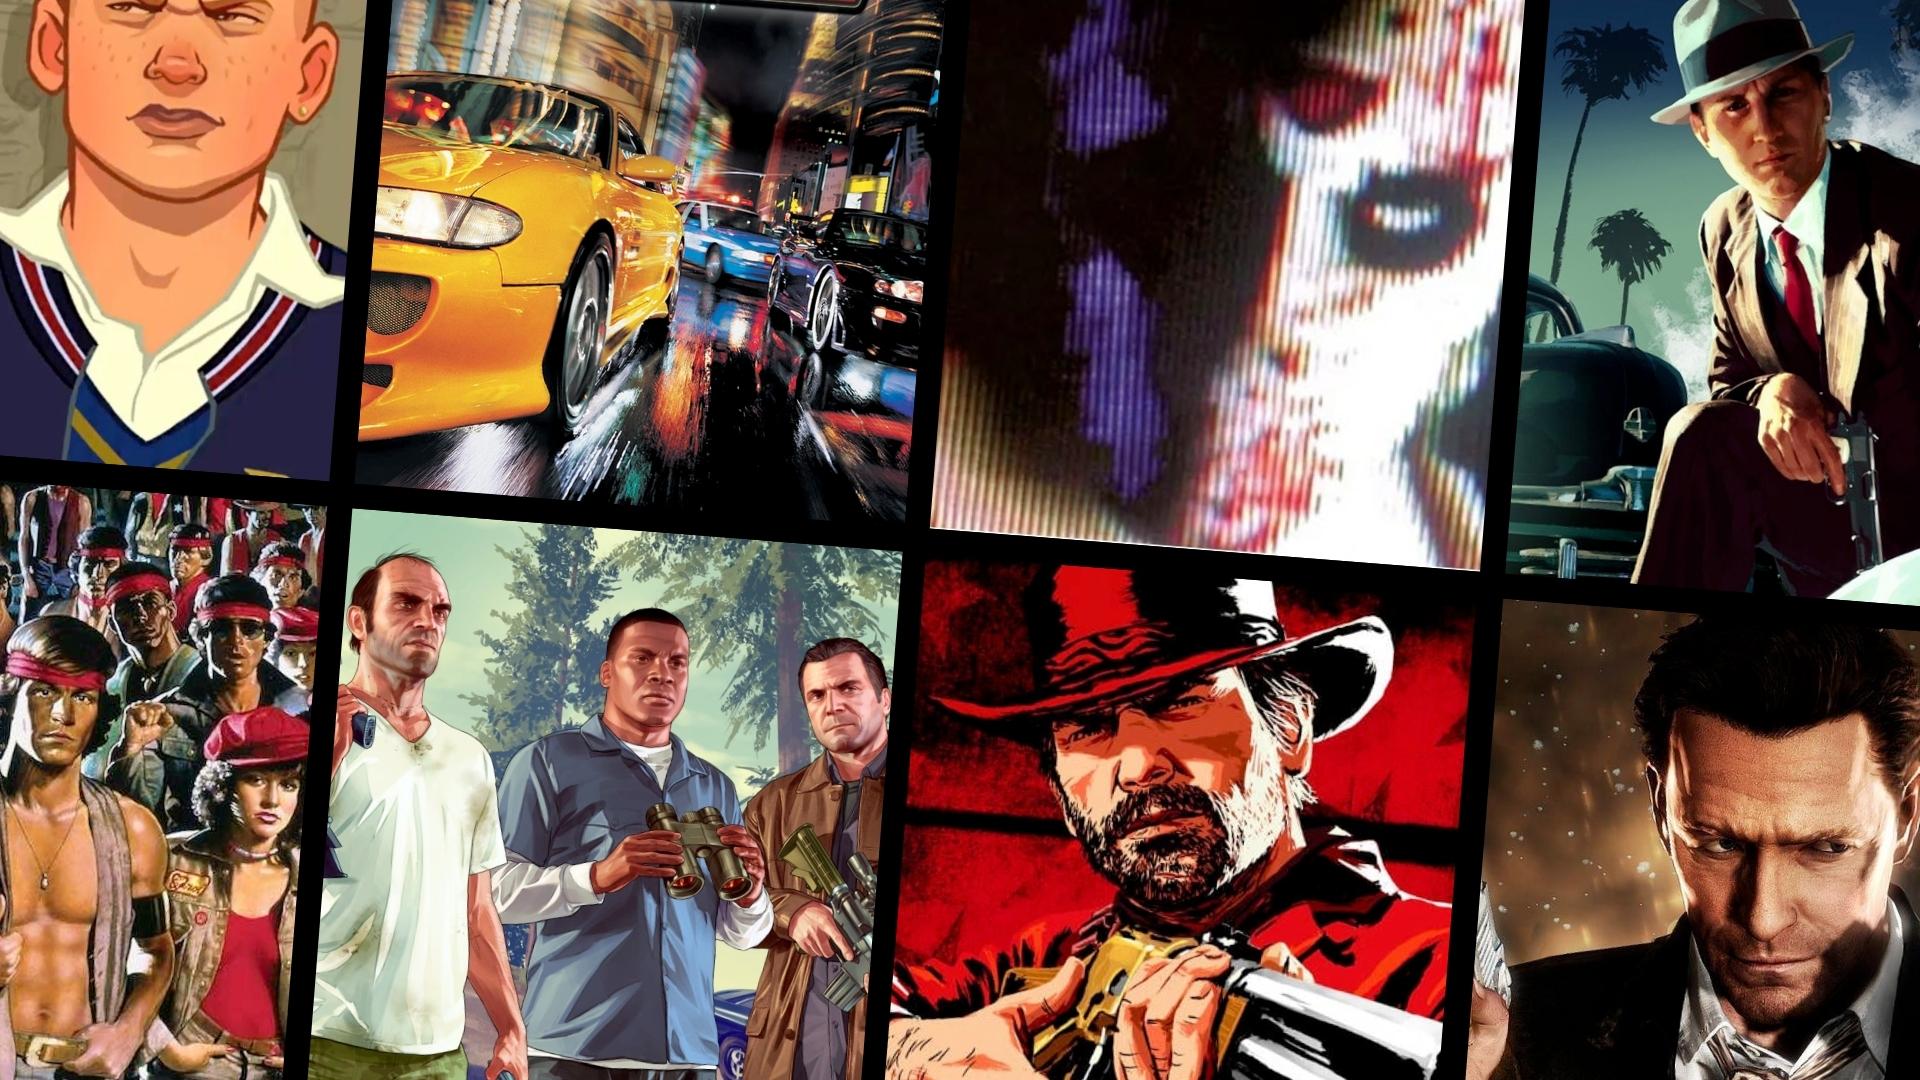 Rockstar's Game Timeline Highlights Just How Much Gaming Has